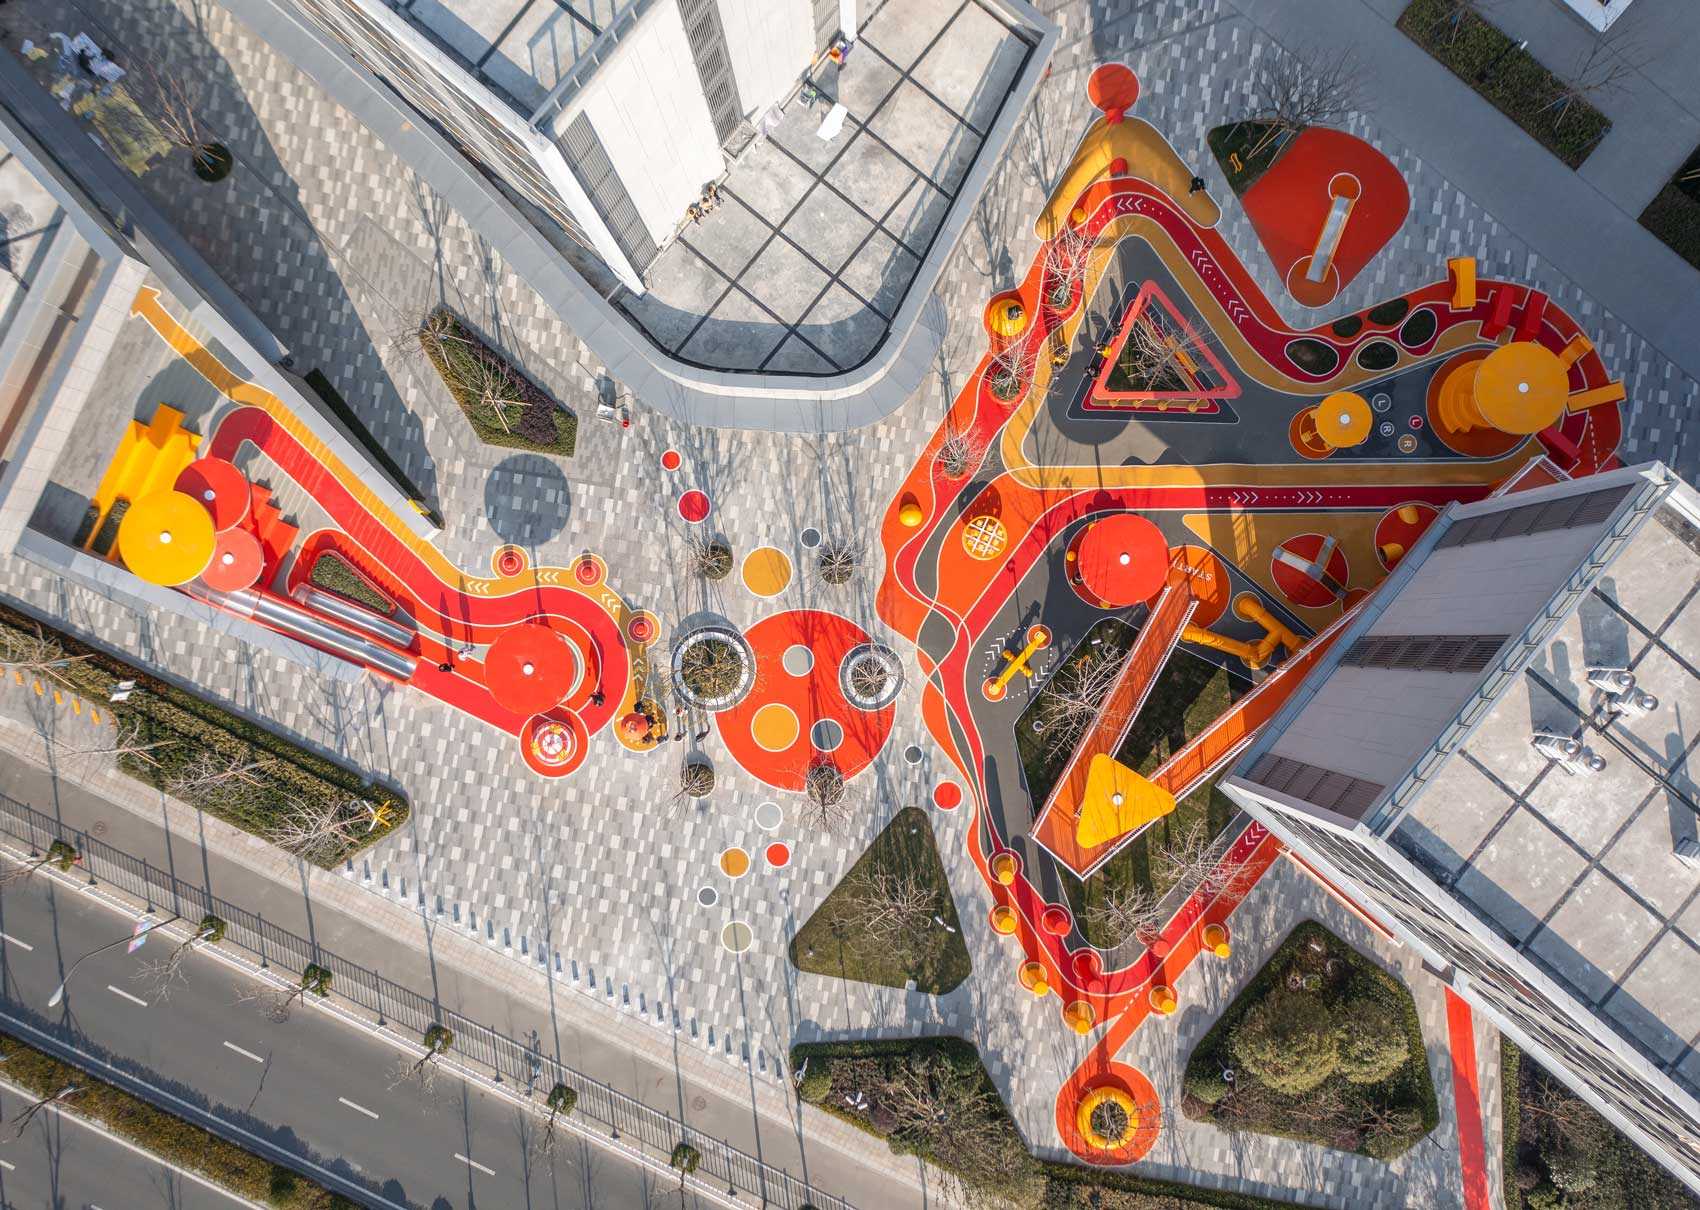 A modern and colorful landscaped park with slides, pathways, a merry-go-round, lounge seating, seesaw, shading structures, seating, swings, and an amphitheater.